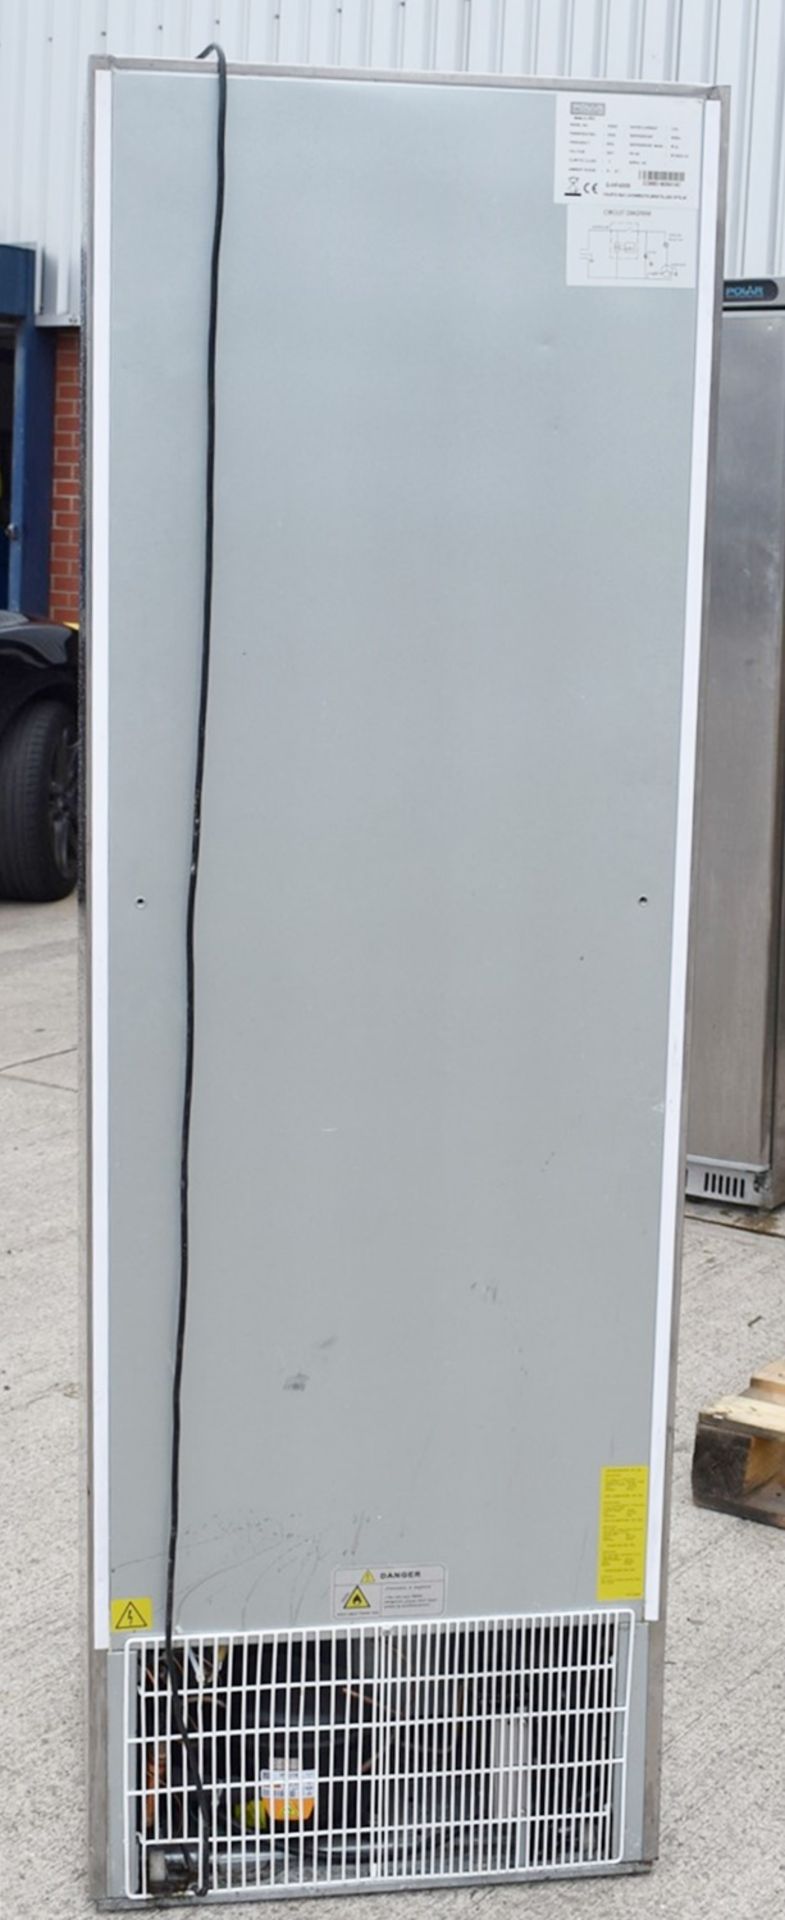 1 x Polar CD083 Upright Freezer With Stainless Steel Exterior - Dimensions: H185 x W60 x D60 cms - Image 6 of 11